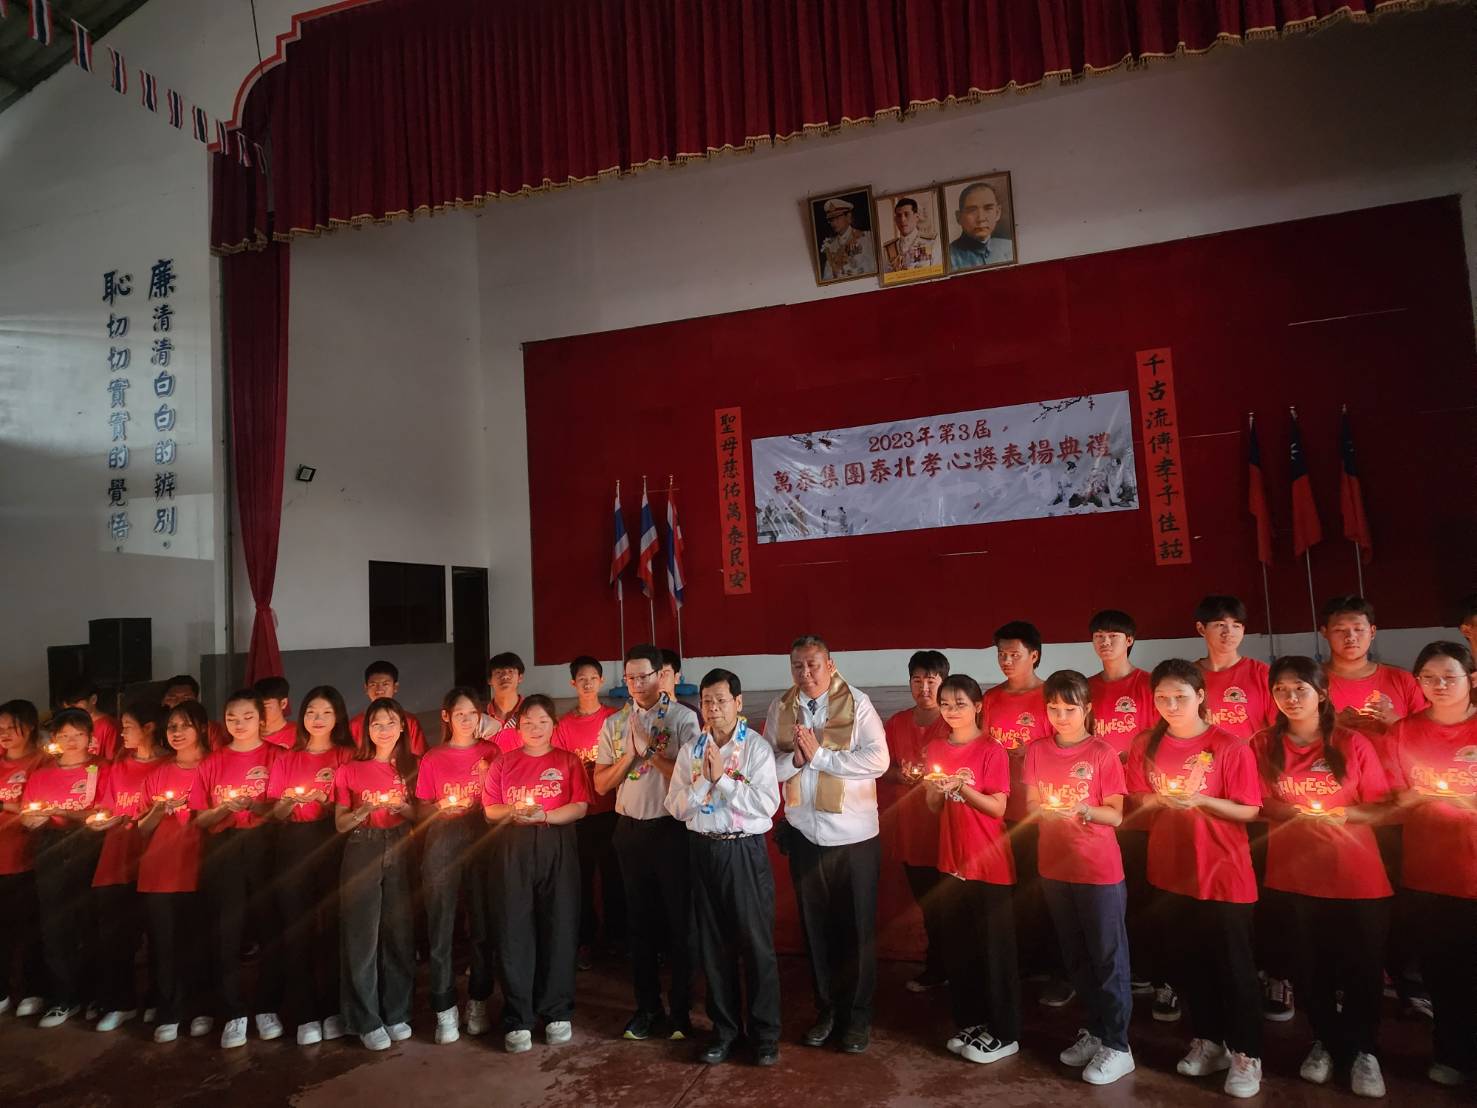 Wonderful Group Northern Thailand Filial Piety Award - Datong Middle School